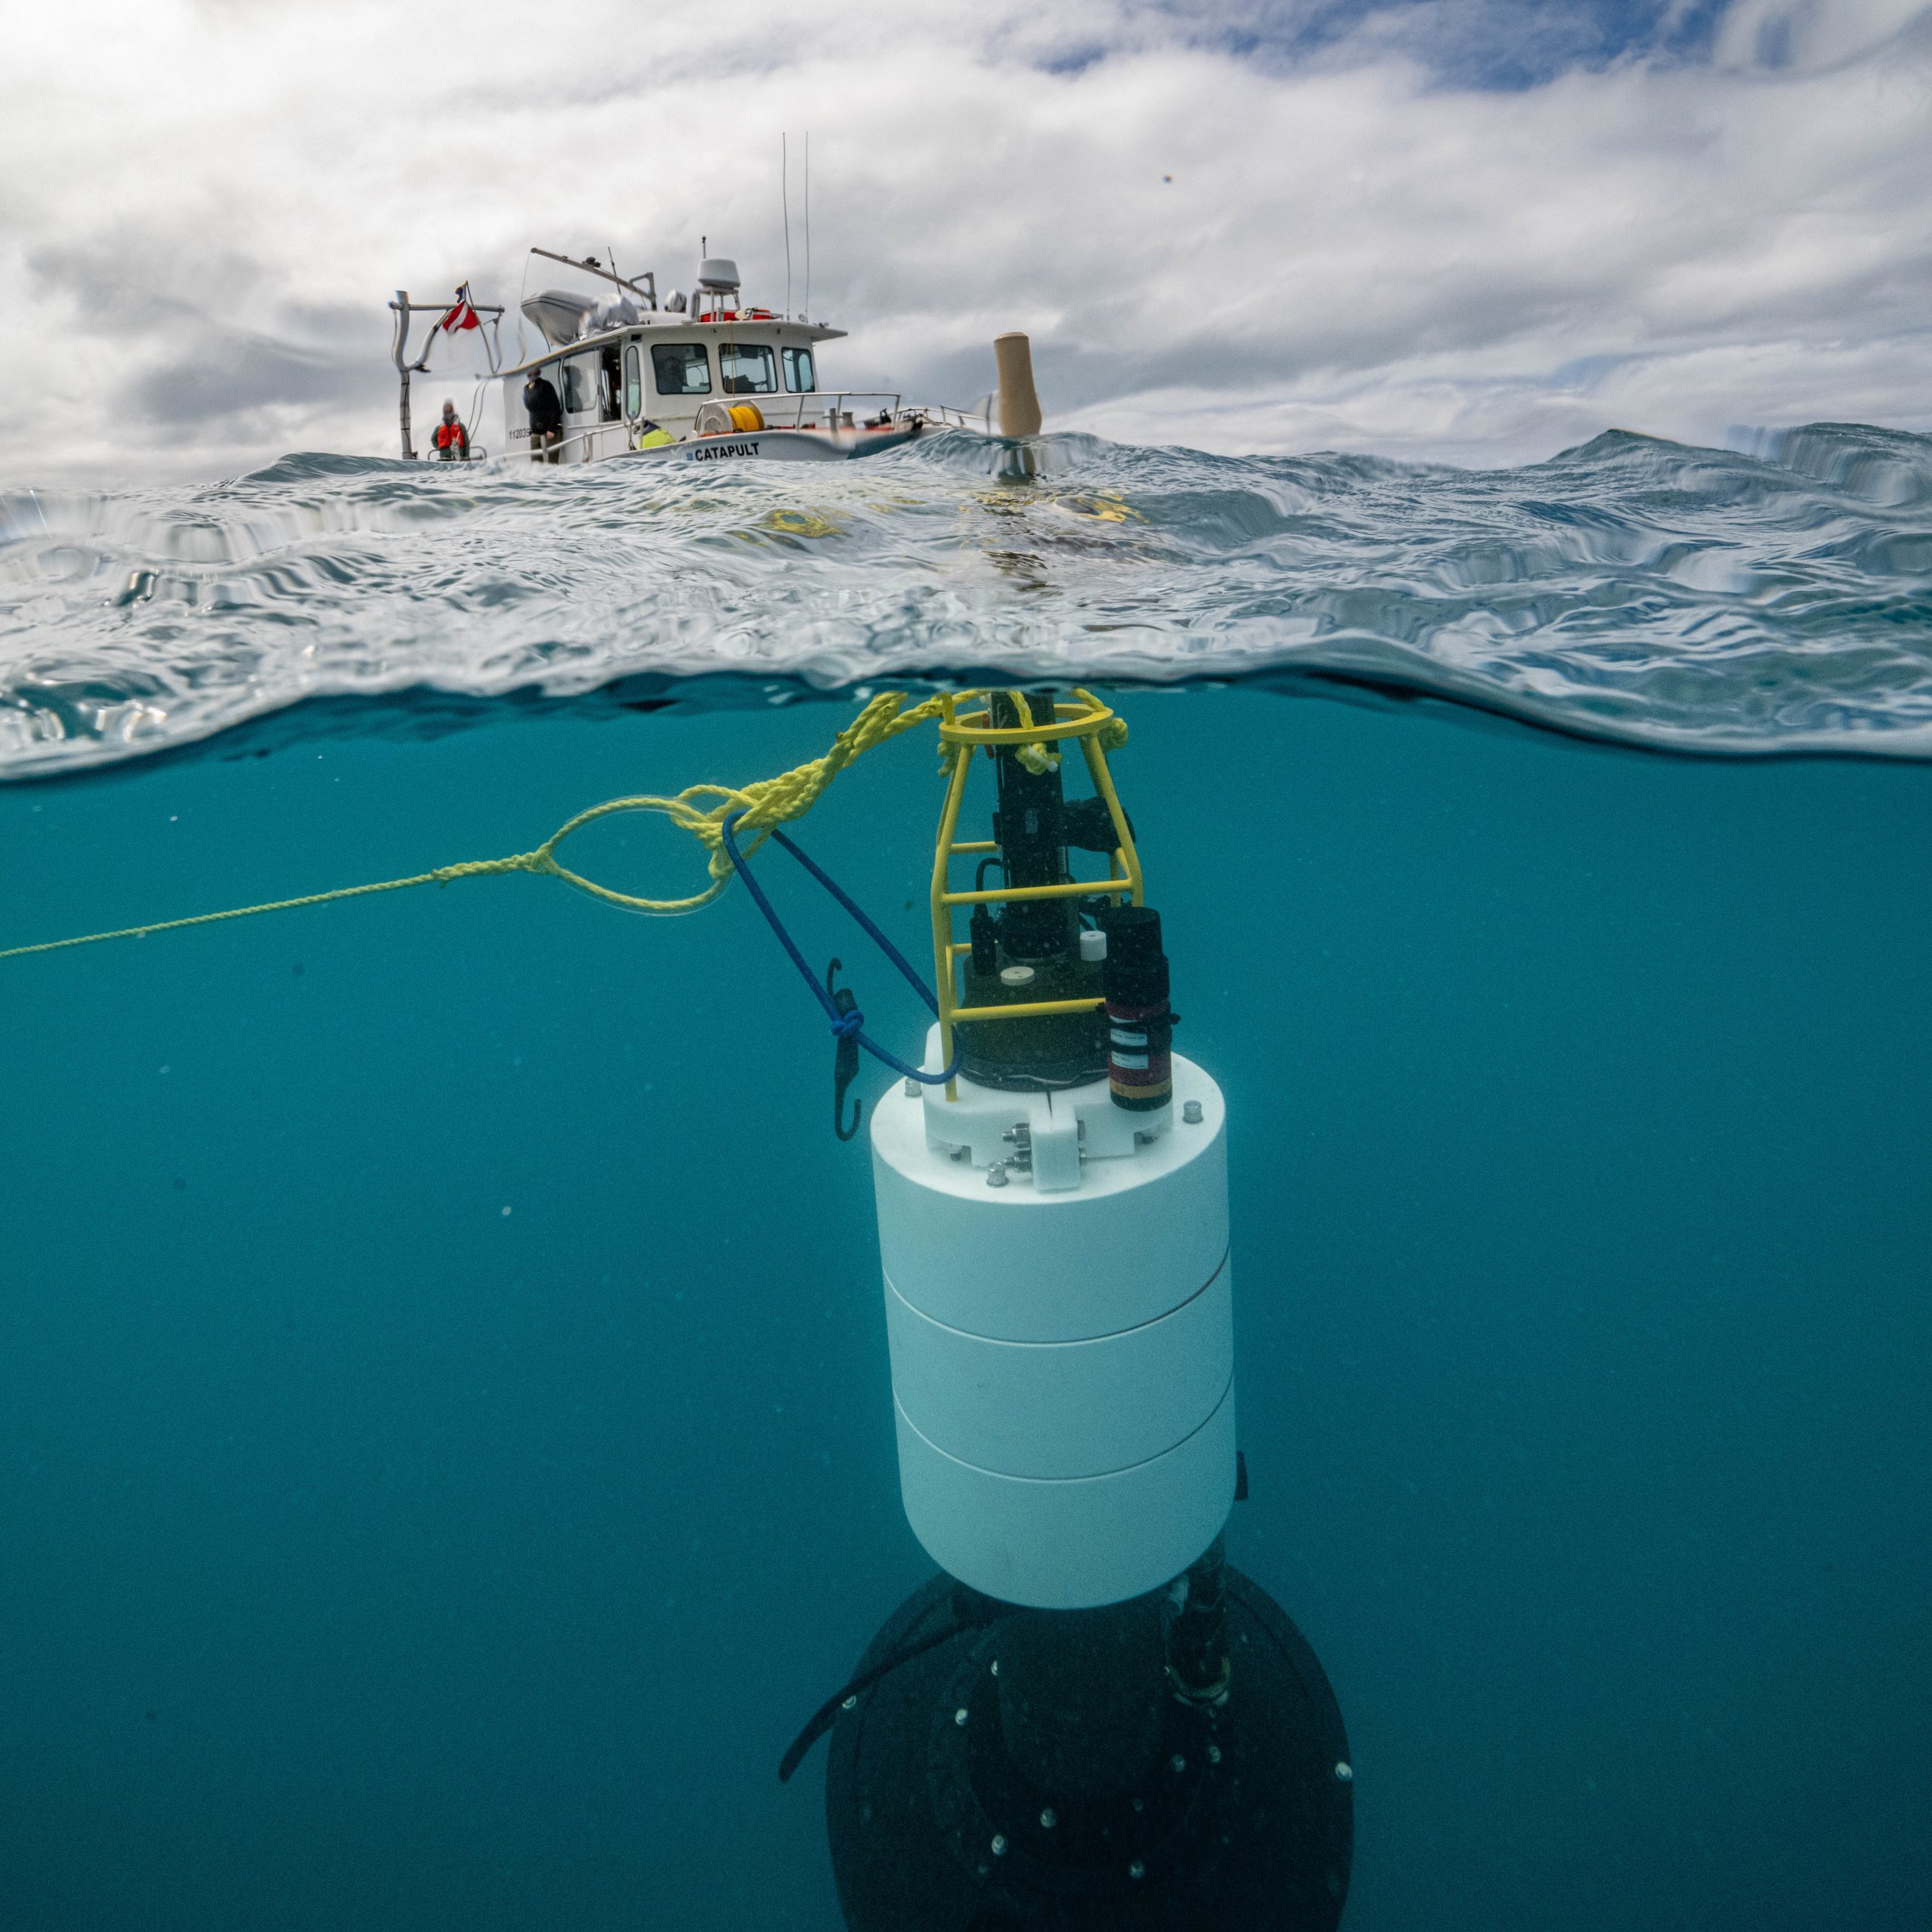 TZEx, the Twilight Zone Explorer, is deployed in the ocean to gather data about marine snow, biological particles that float through the water column, and serve the important role of transporting carbon from surface waters to the deep sea.
